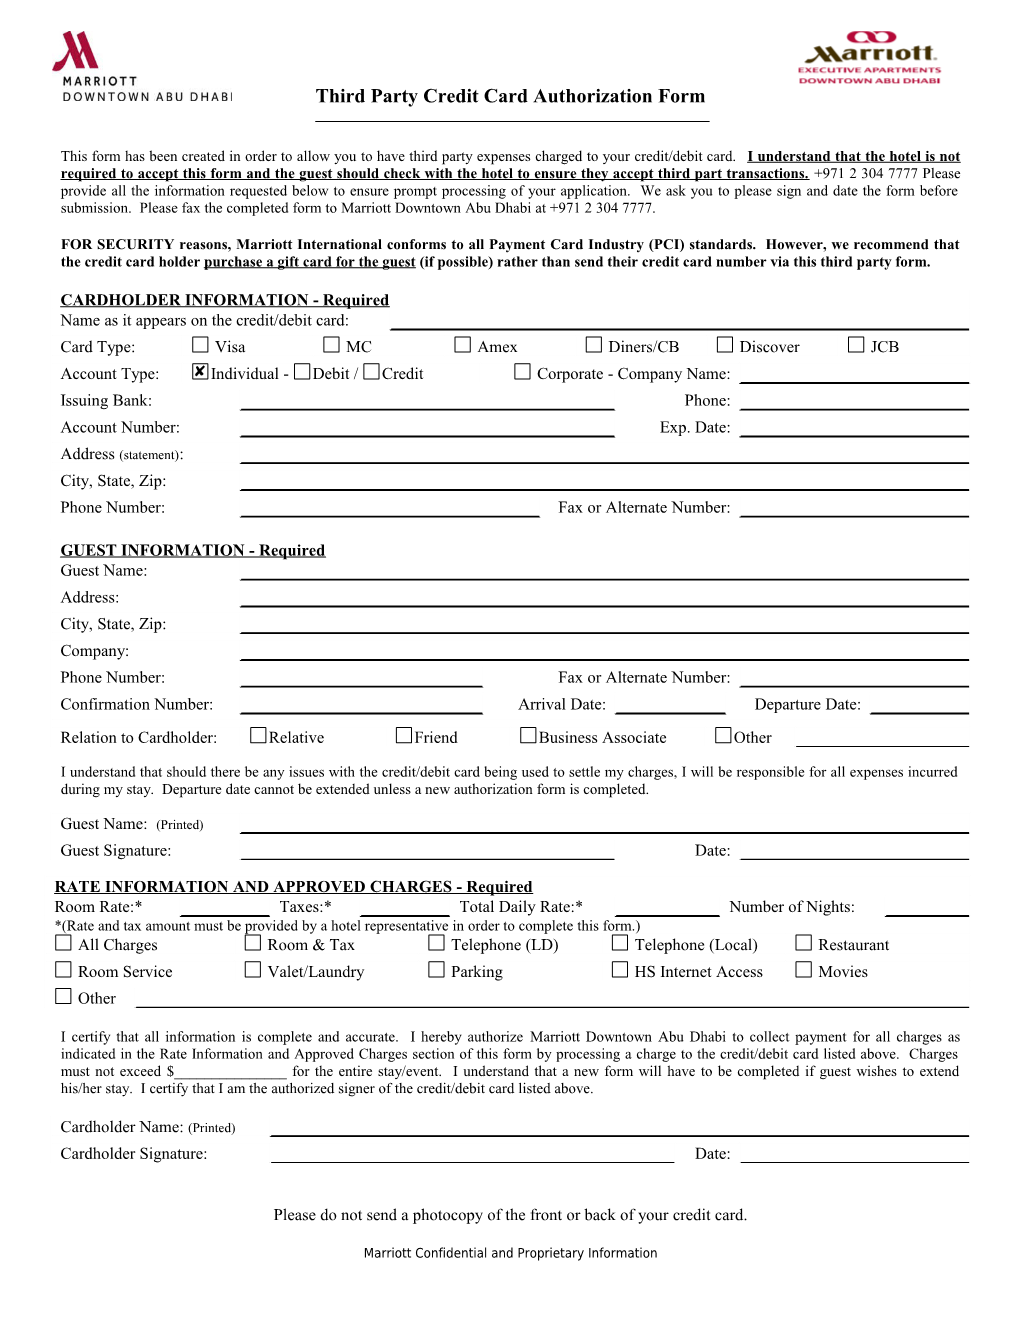 Courtyard Credit Card Third Party Authorization Form